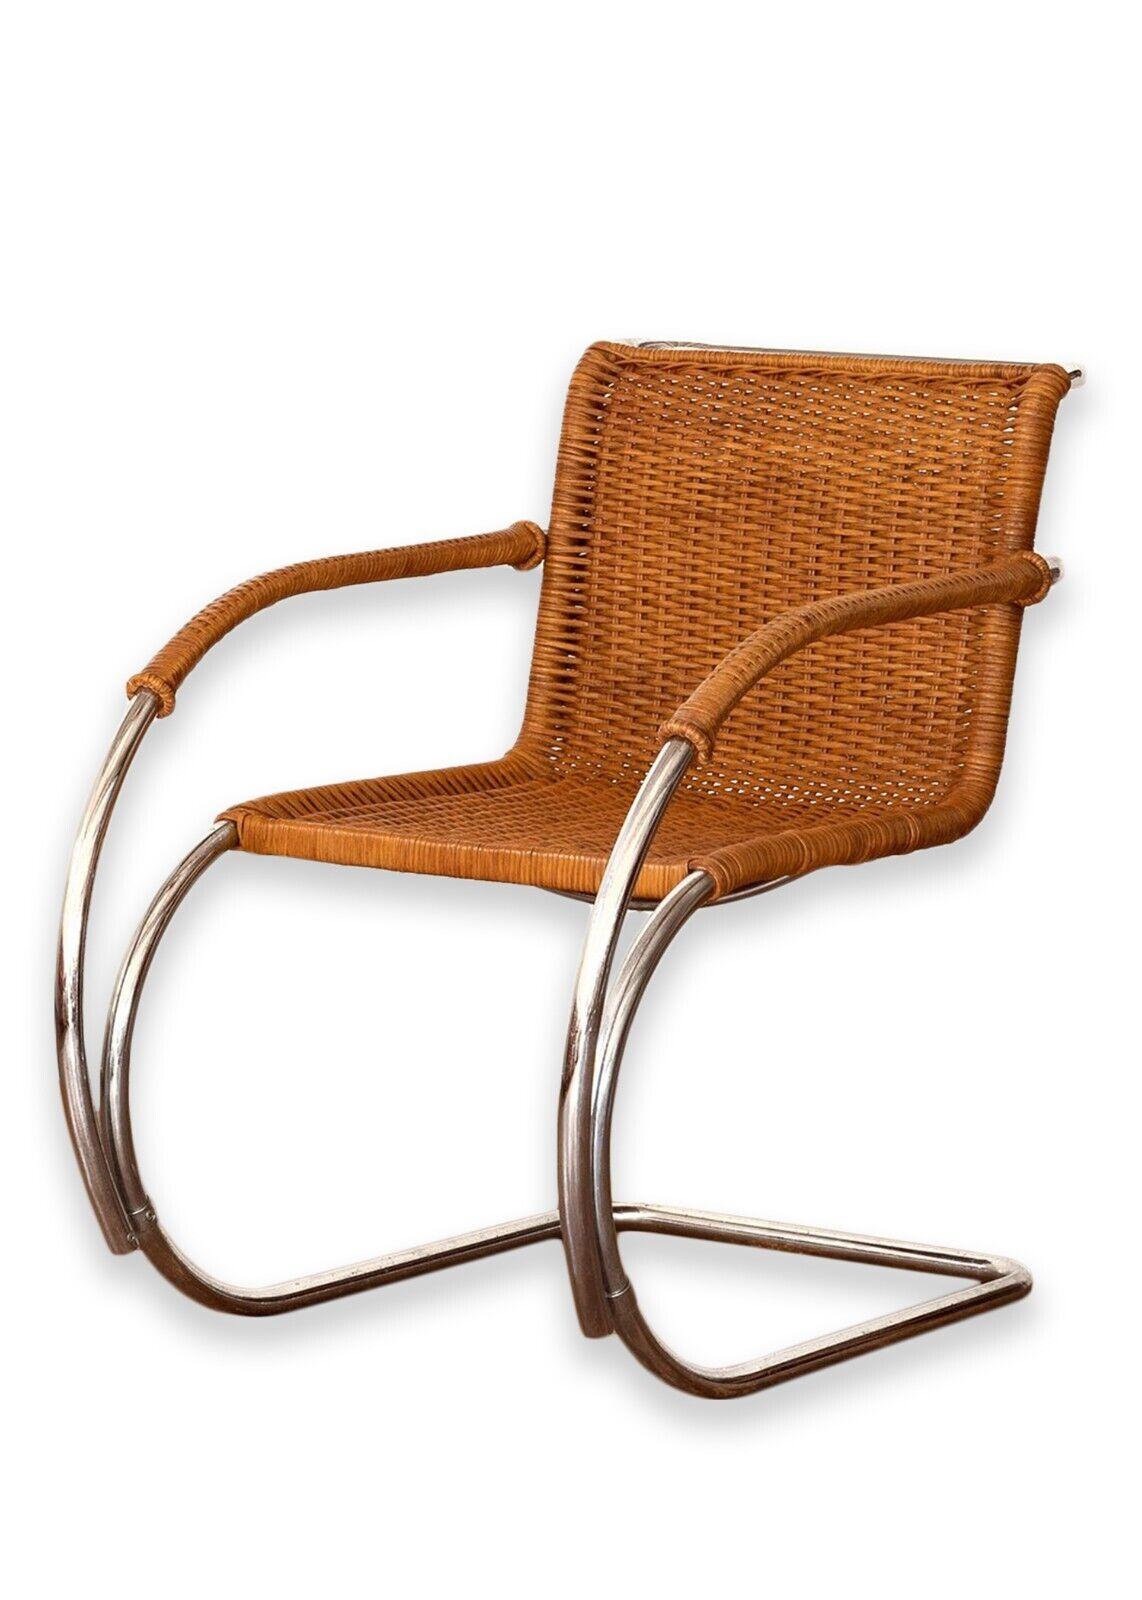 A set of 4 Mies Van Der Rohe MR20 armchairs. A wonderful and iconic set of chairs originally designed by Van Der Rohe in 1927, this particular set is believed to be produced in the 1960s. This set features a beautiful wicker rattan seat and back